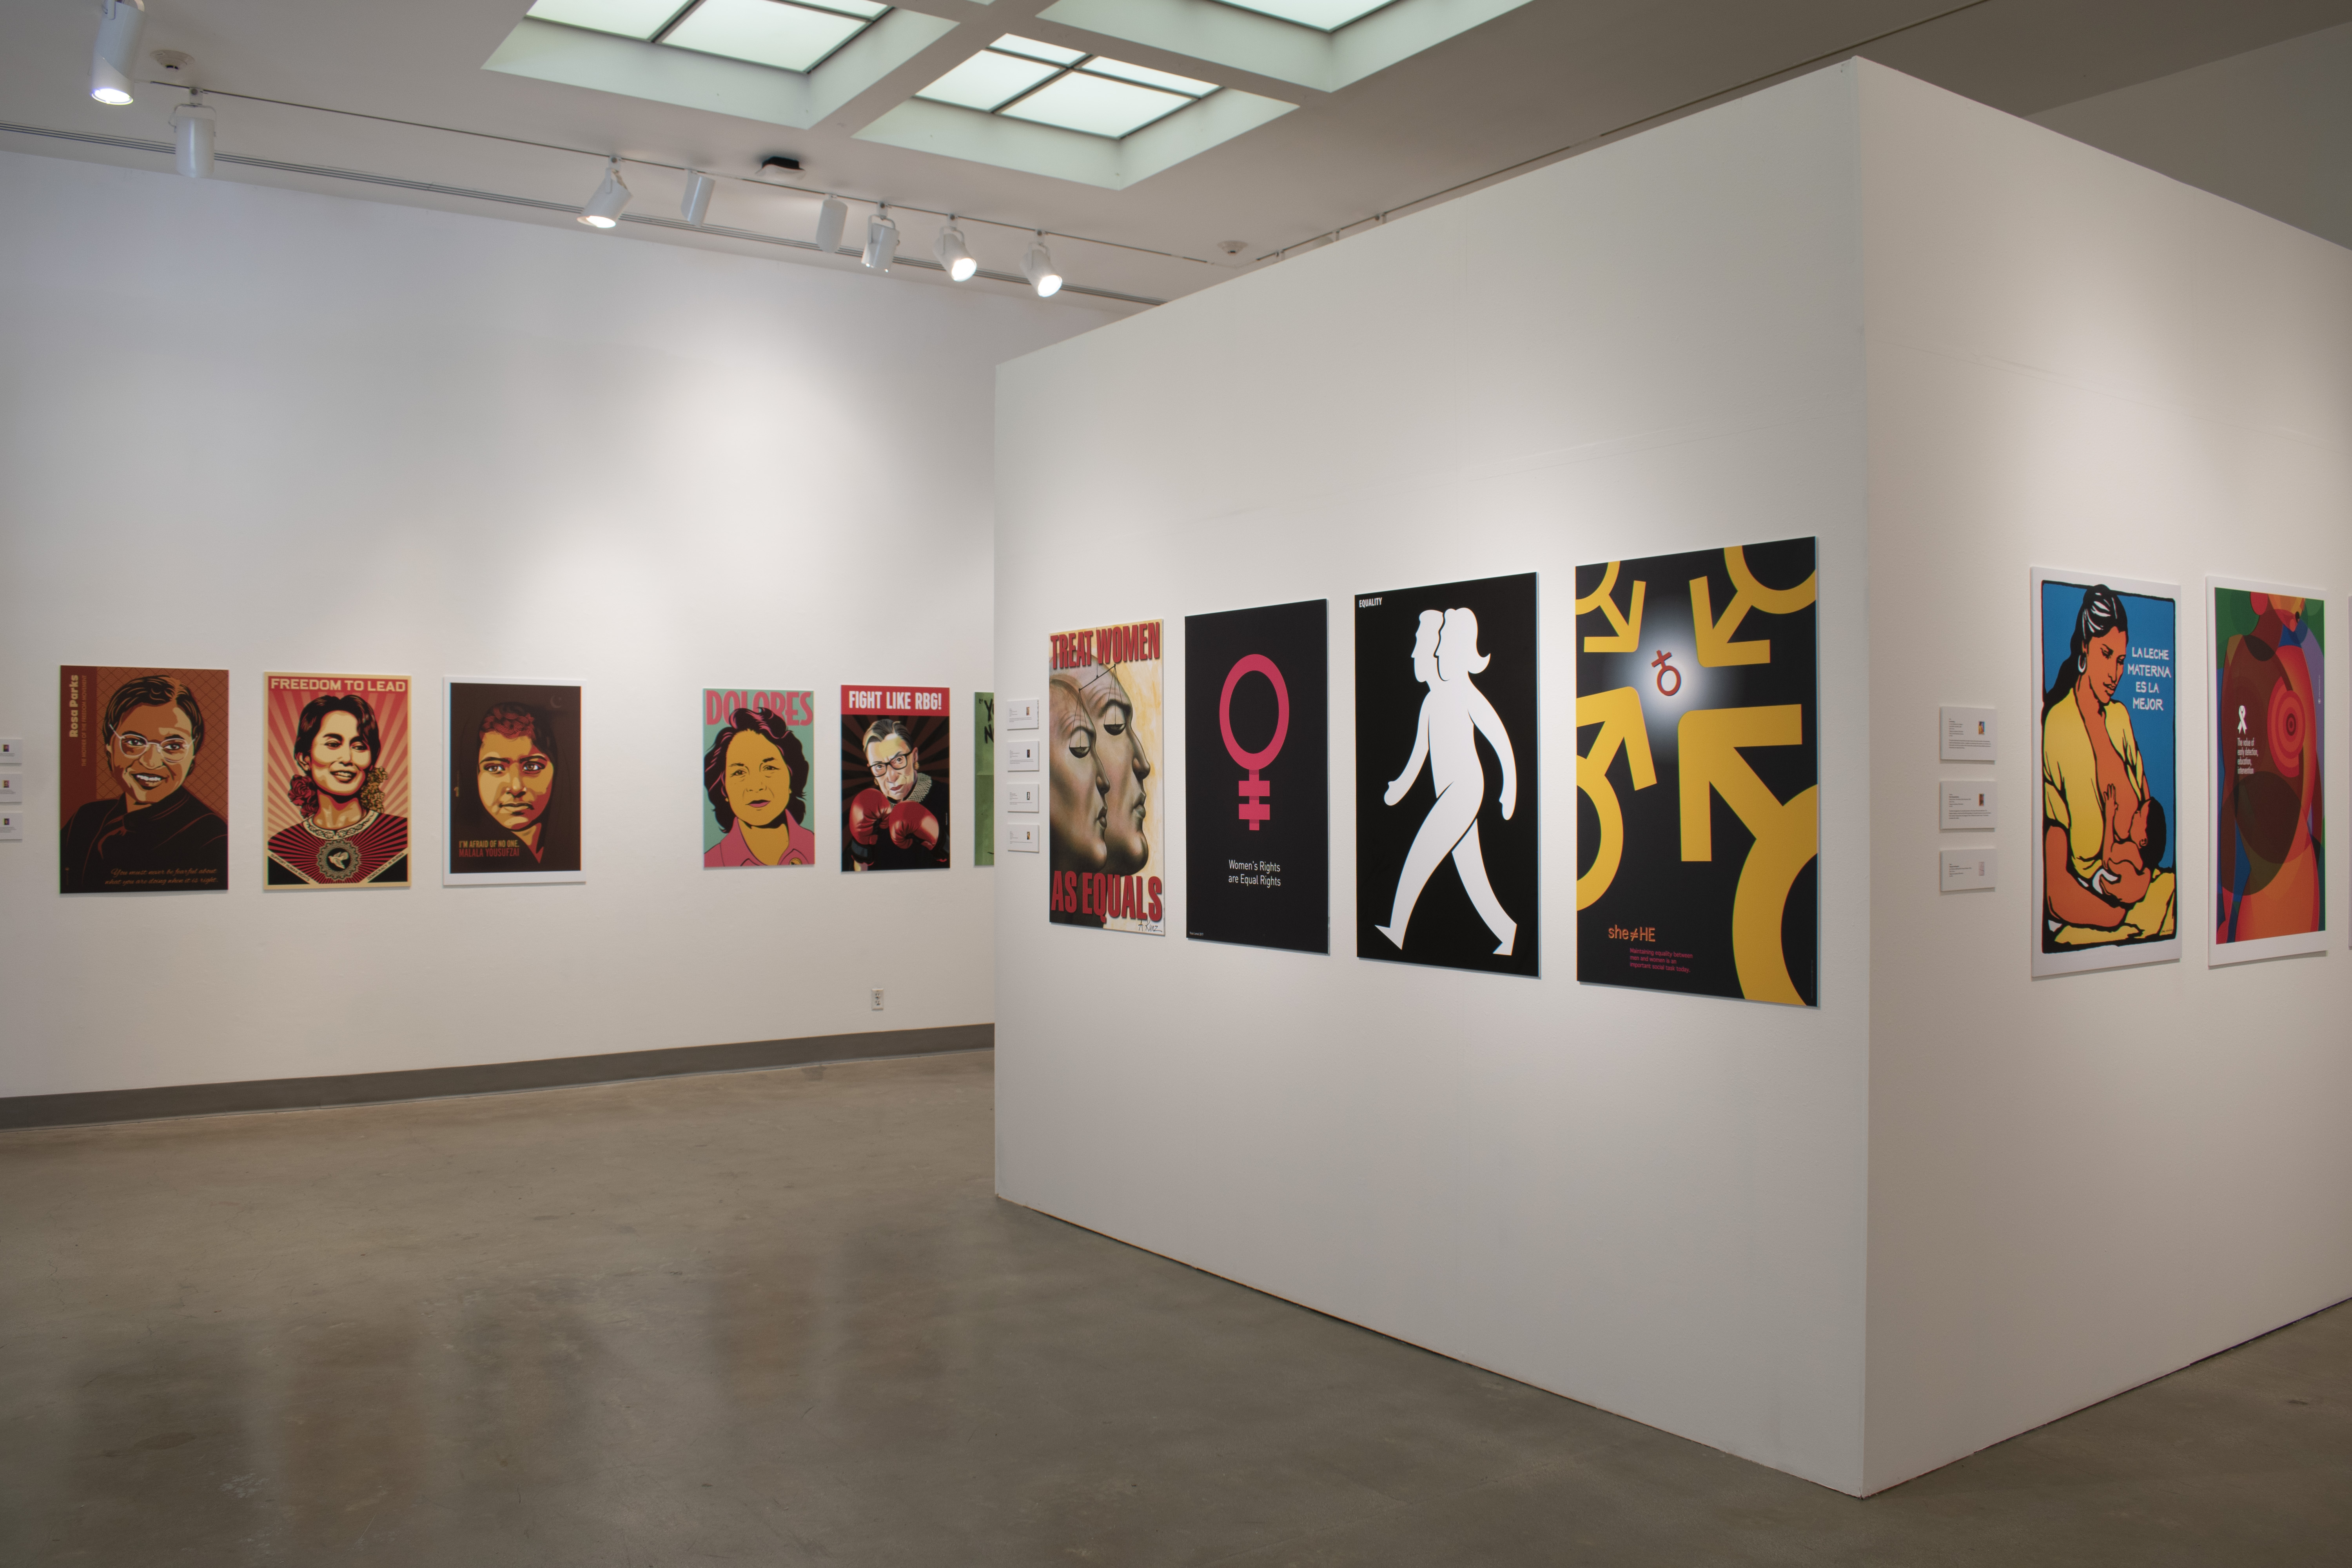 Installation View, Front West Gallery, Women's Rights are Human Rights Exhibition, Sept 15, 2021 to Dec 1, 2021